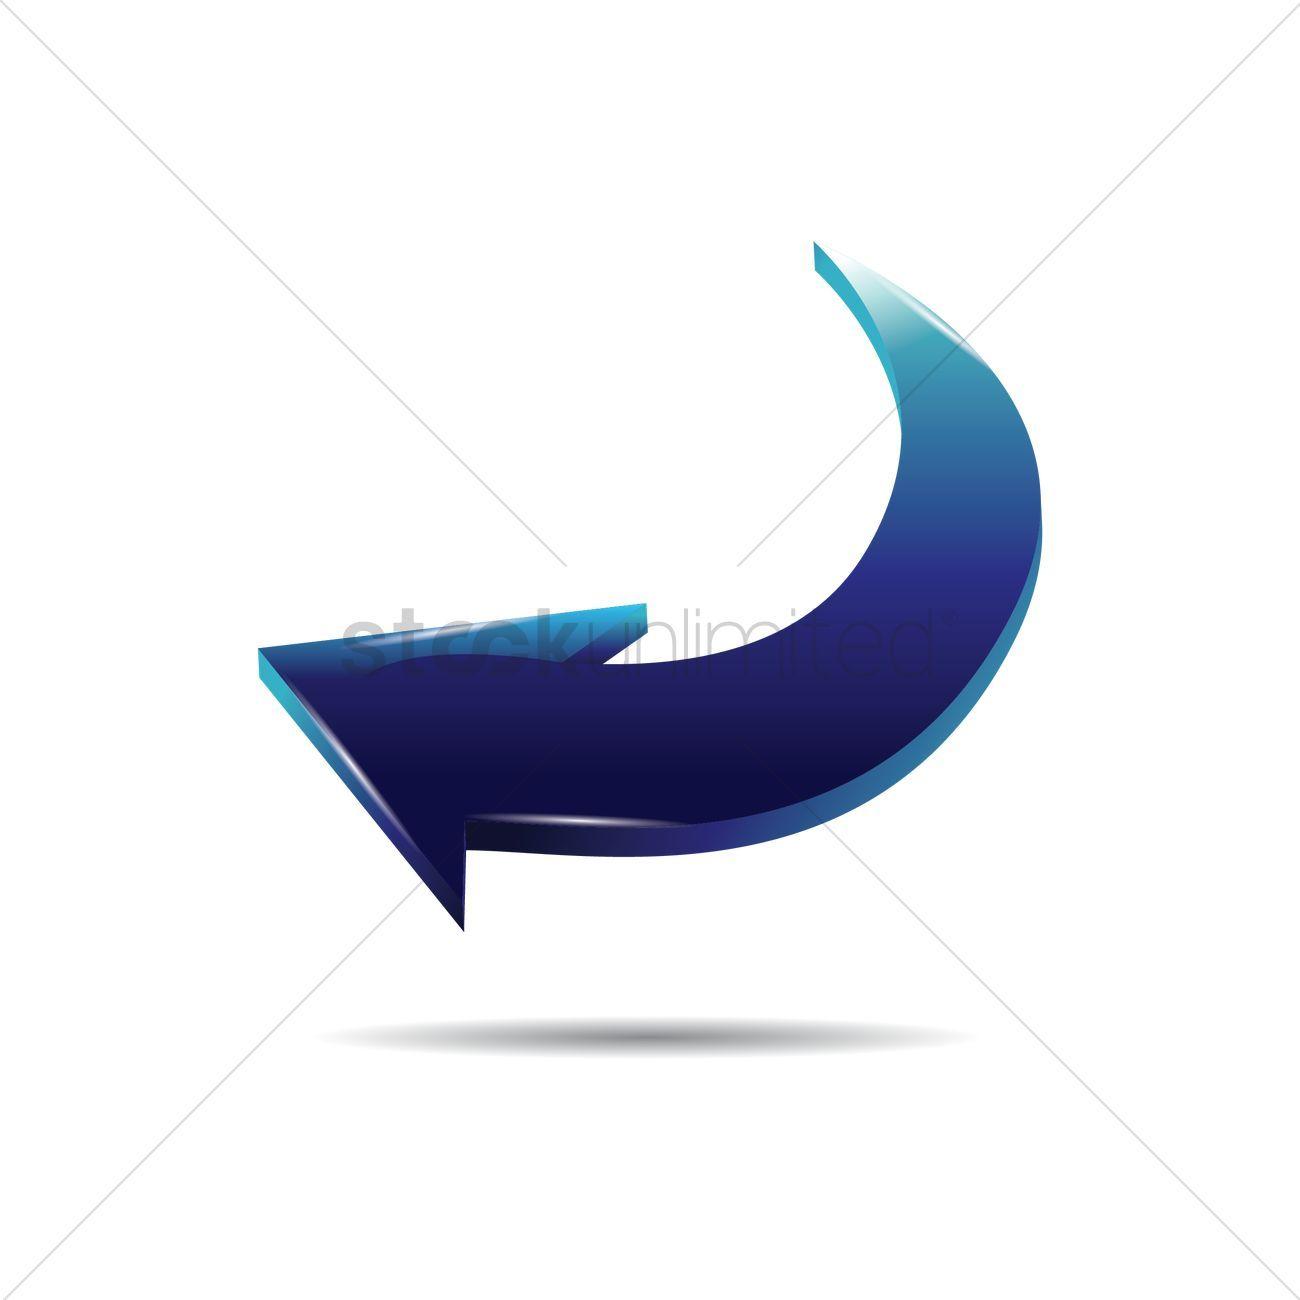 Curved Arrow Logo - 3d left curved arrow Vector Image - 1611372 | StockUnlimited